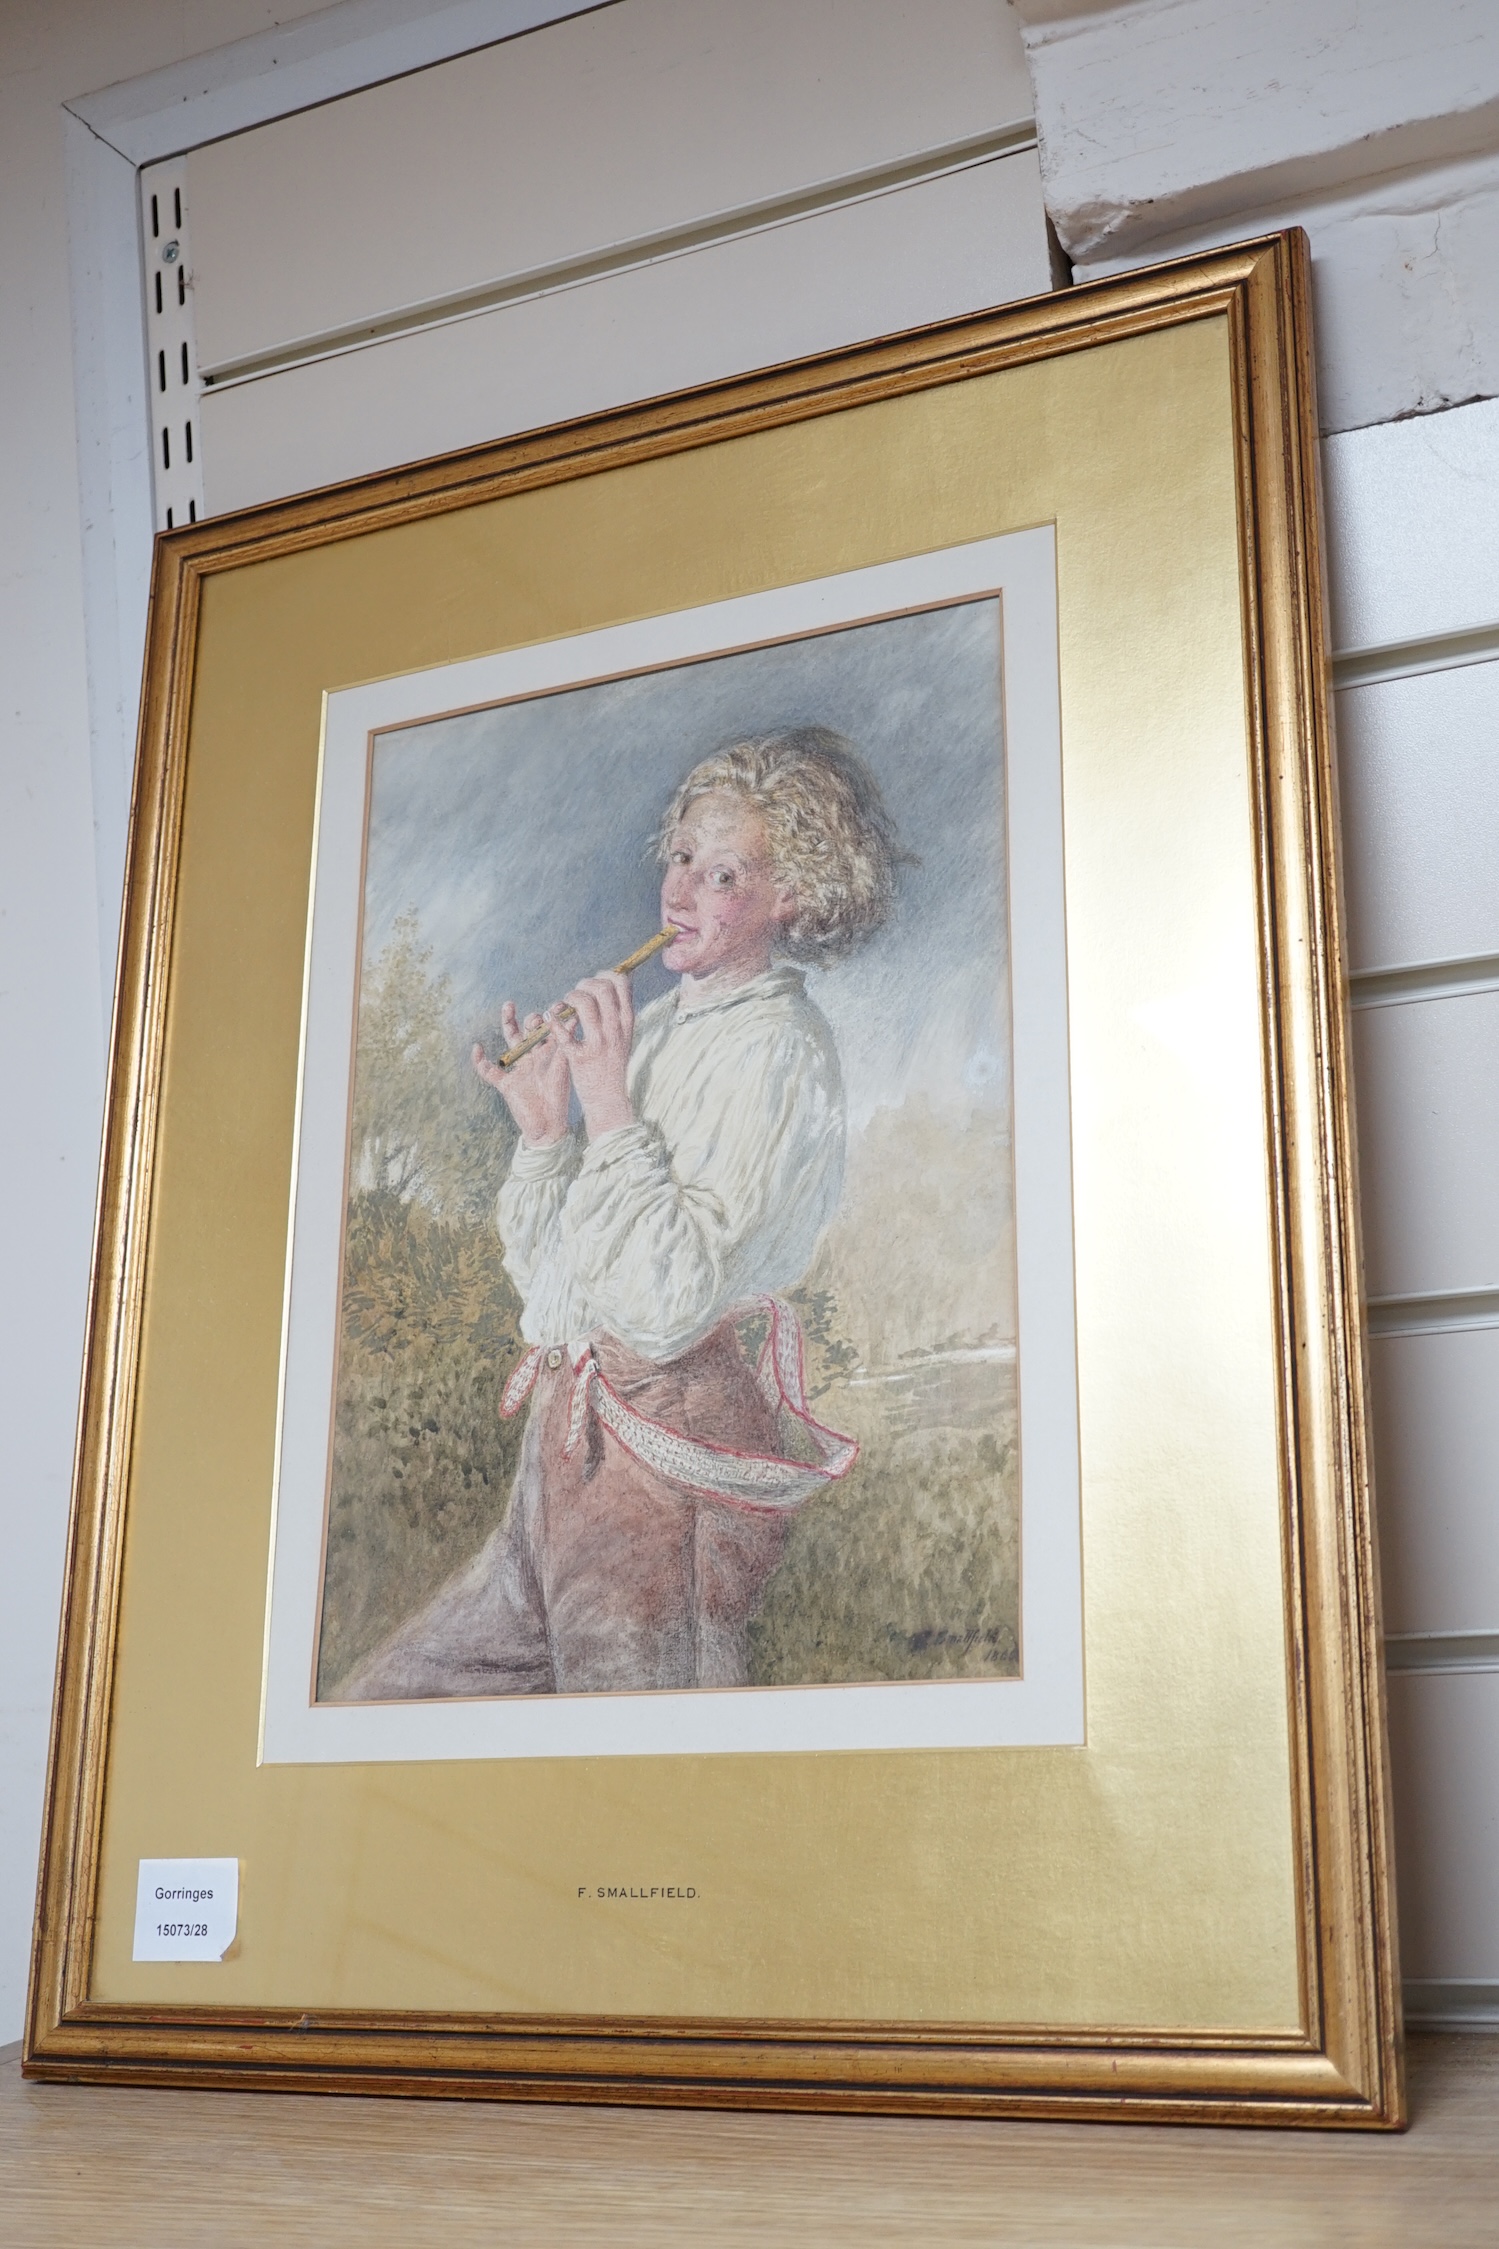 Frederick Smallfield ARWS (1829-1915), watercolour, Study of a peasant boy playing a flute, signed and dated 1860, 34 x 24cm. Condition - fair